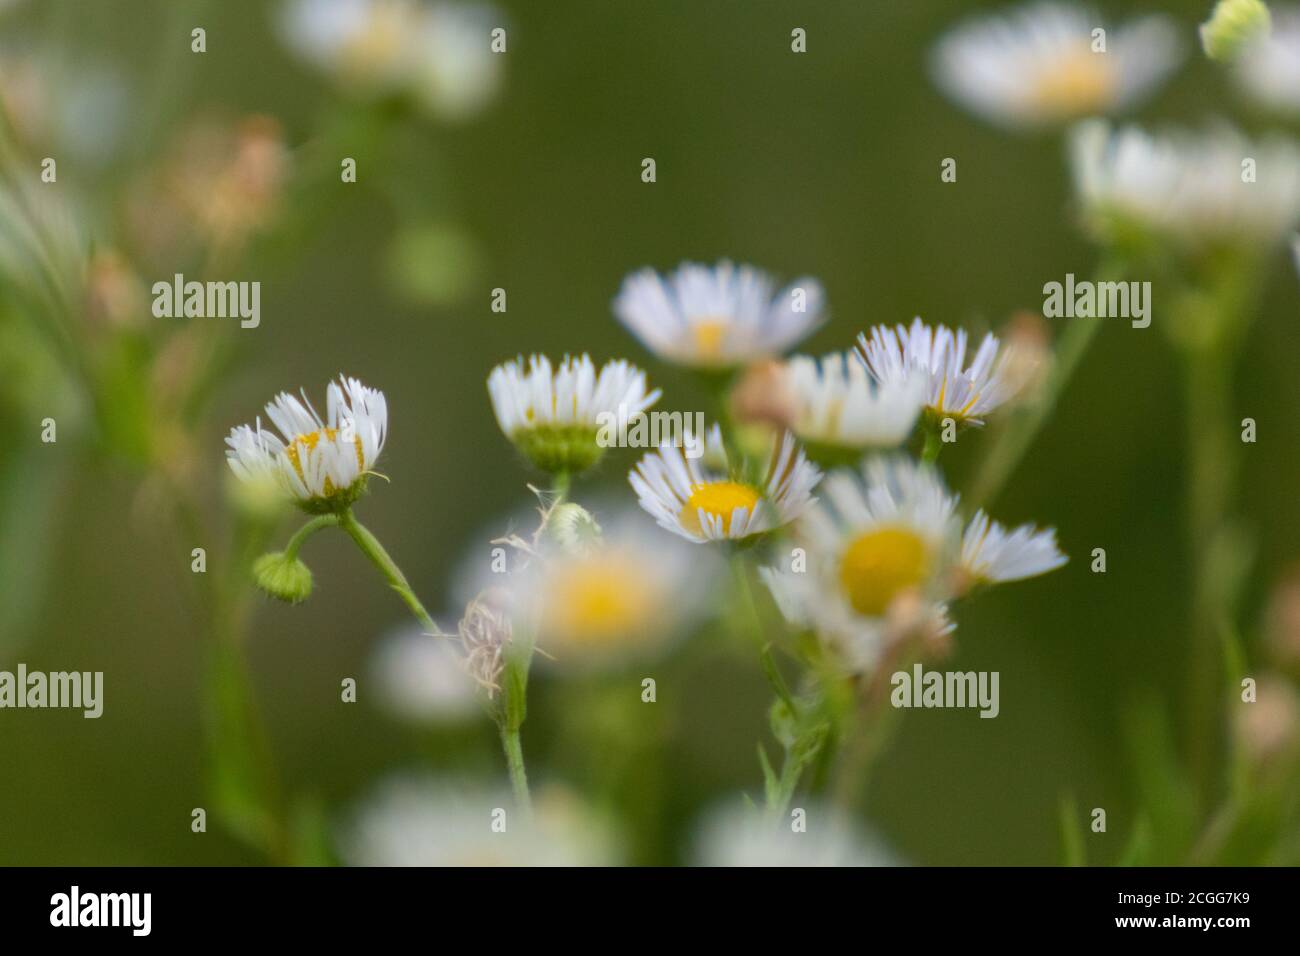 Sweet tiny white wild daisy like flowers in wild natural field in green blurred environment background. Erigeron strigosus Stock Photo